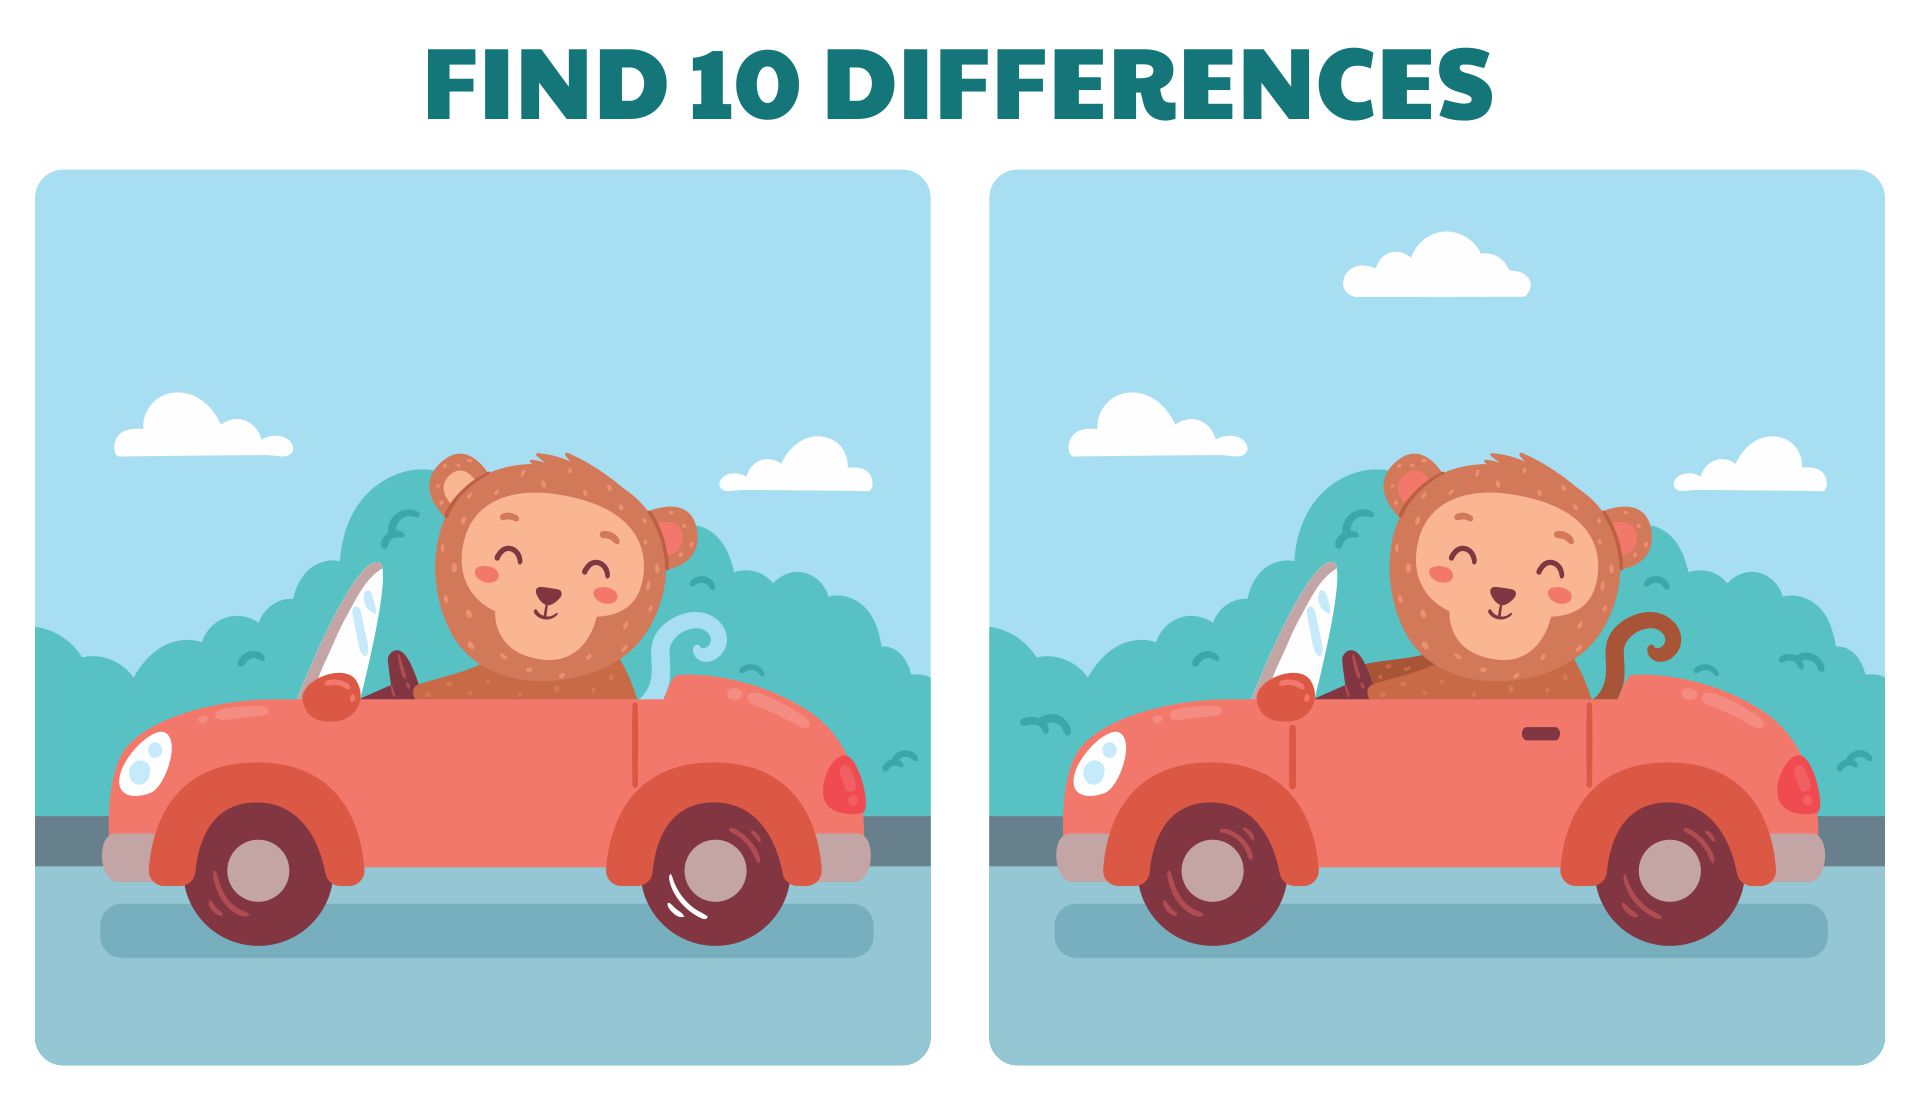 8-best-images-of-printable-adult-find-the-difference-spot-the